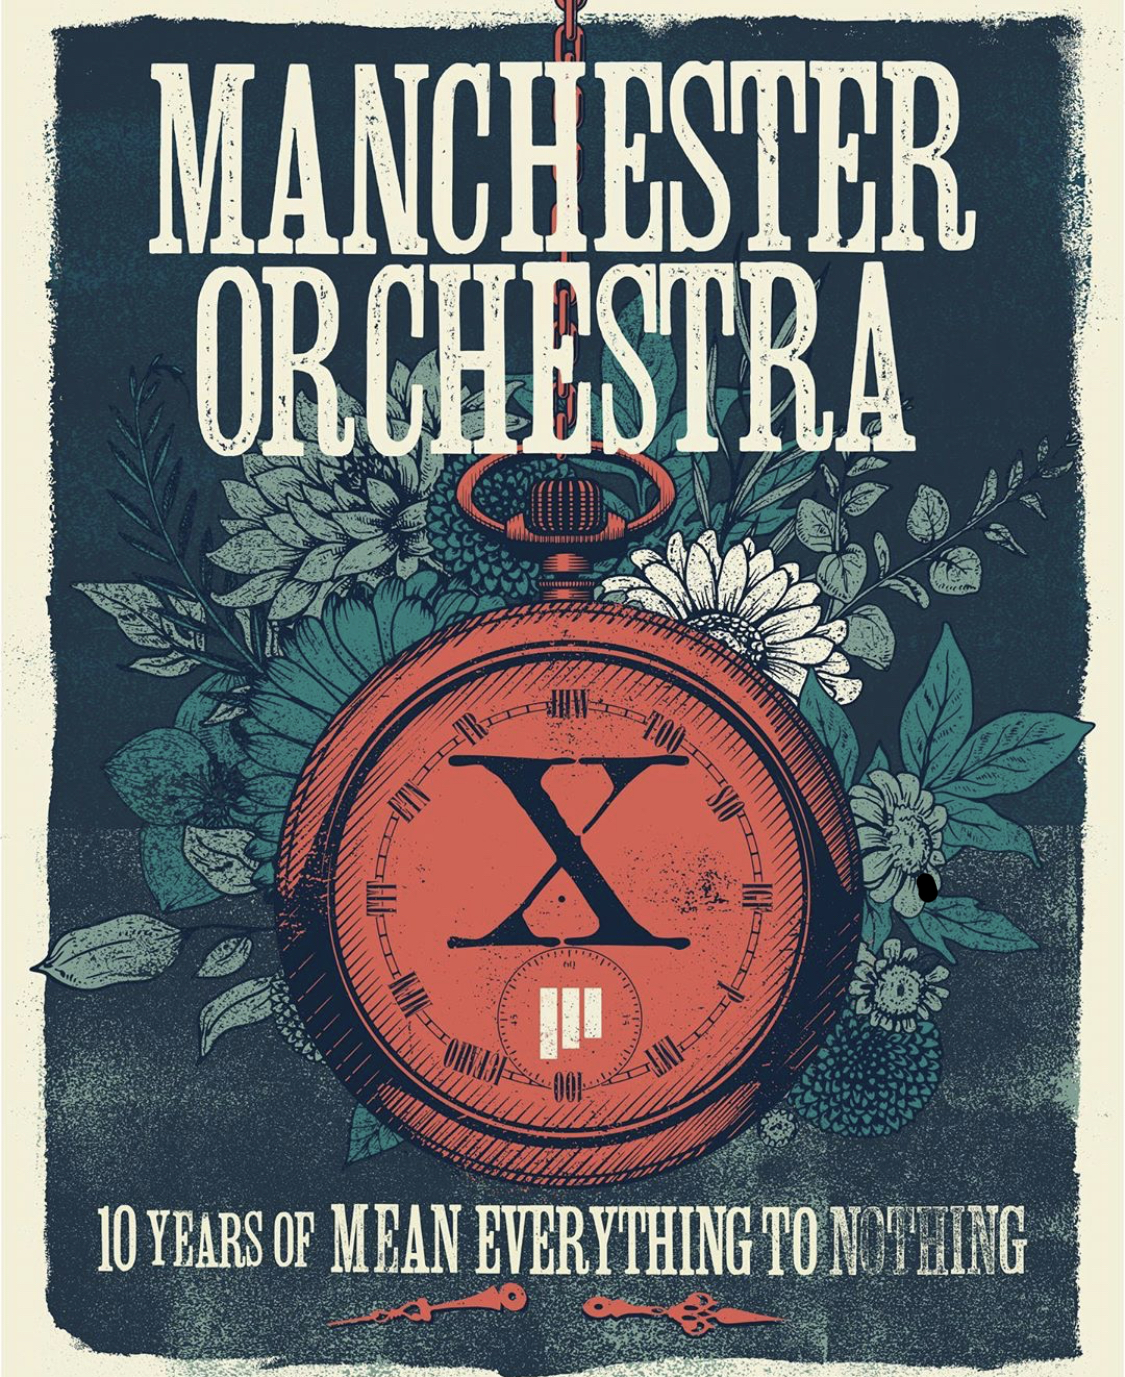 Want to win two tickets to see Manchester Orchestra in Charlotte?